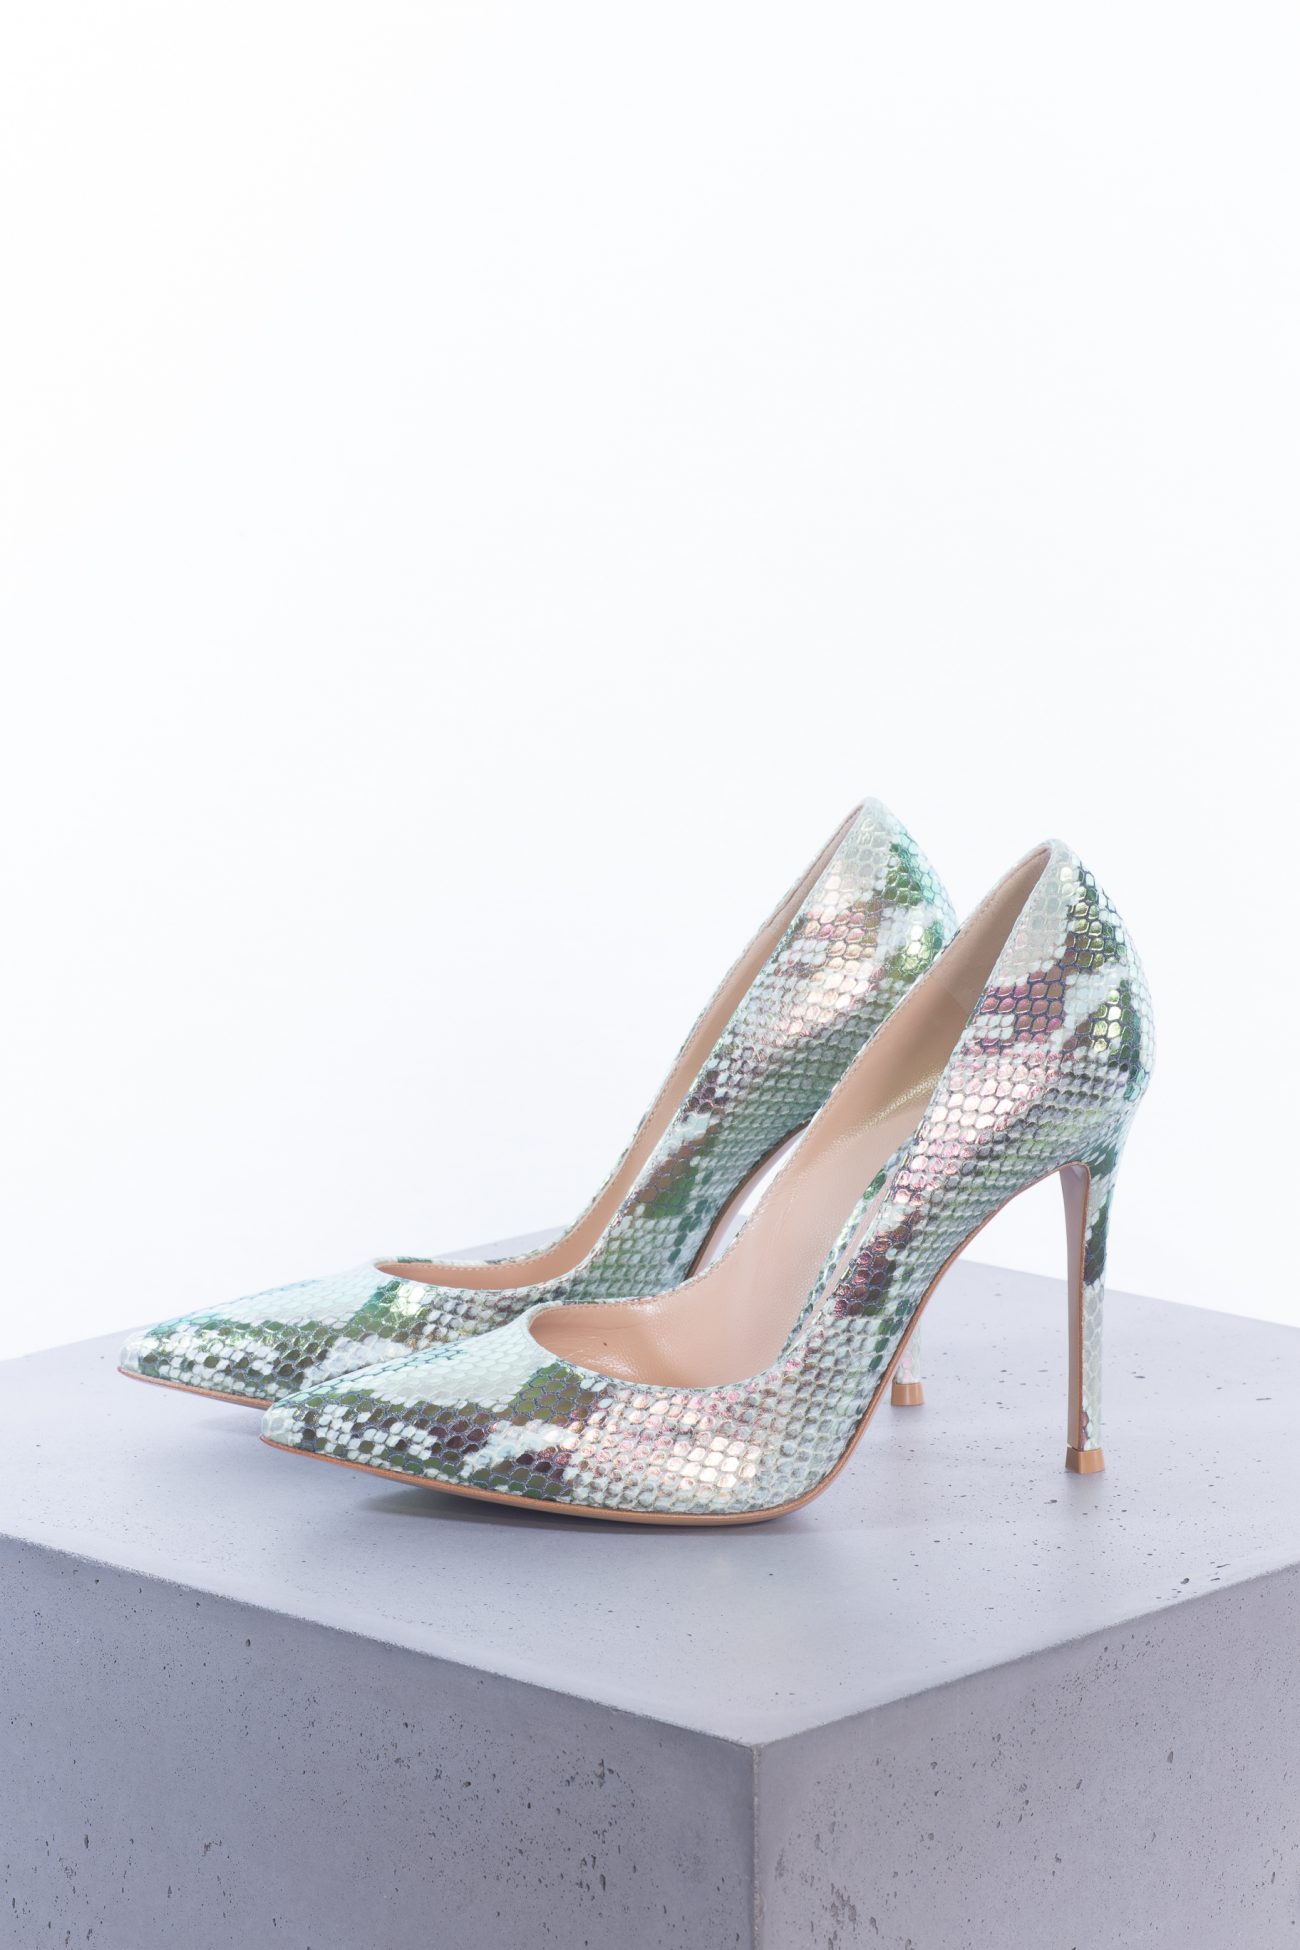 Gianvito Rossi 105 snake-effect leather pumps